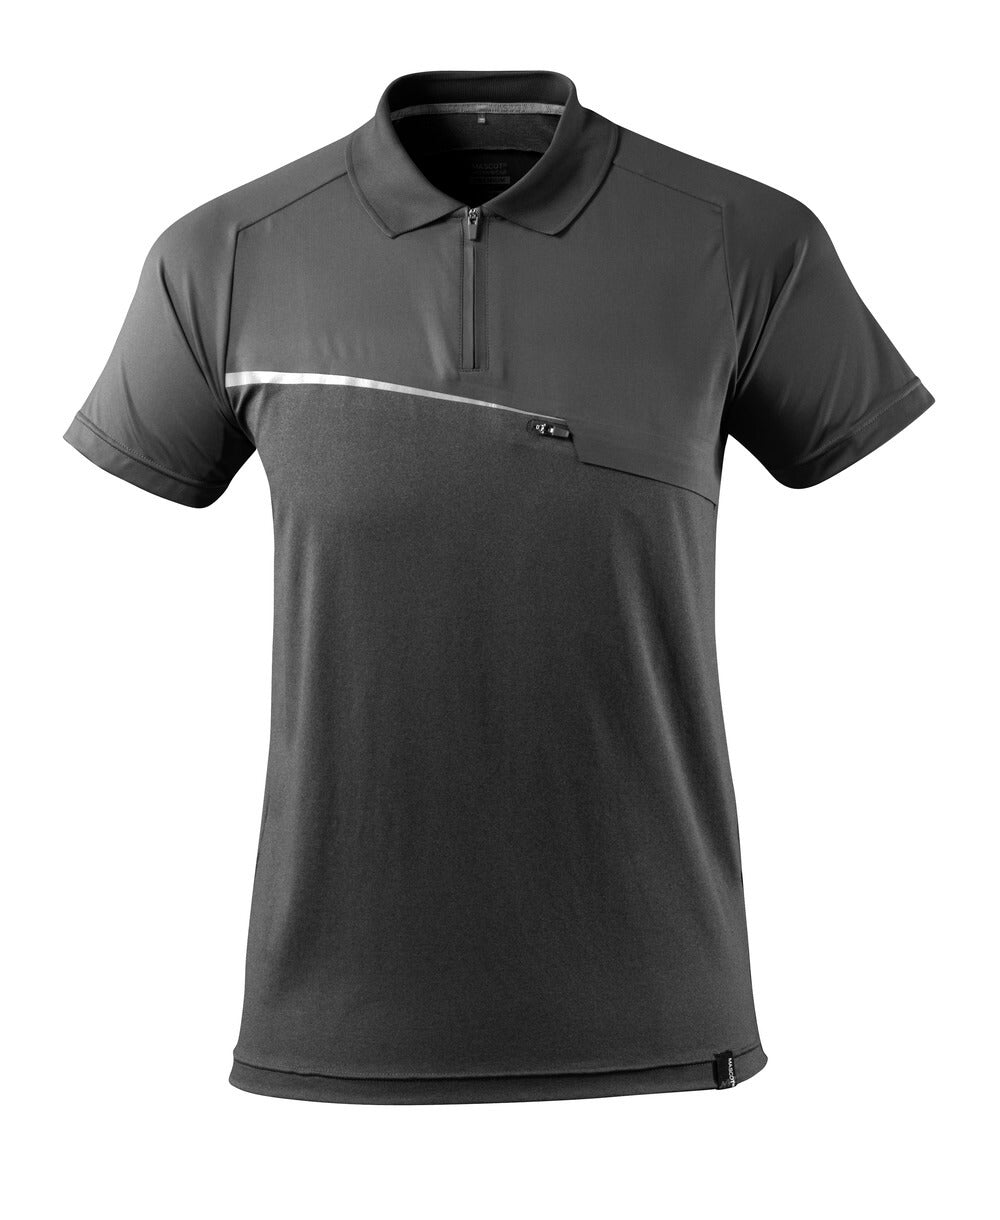 MASCOT®ADVANCED Polo Shirt with chest pocket  17283 - DaltonSafety